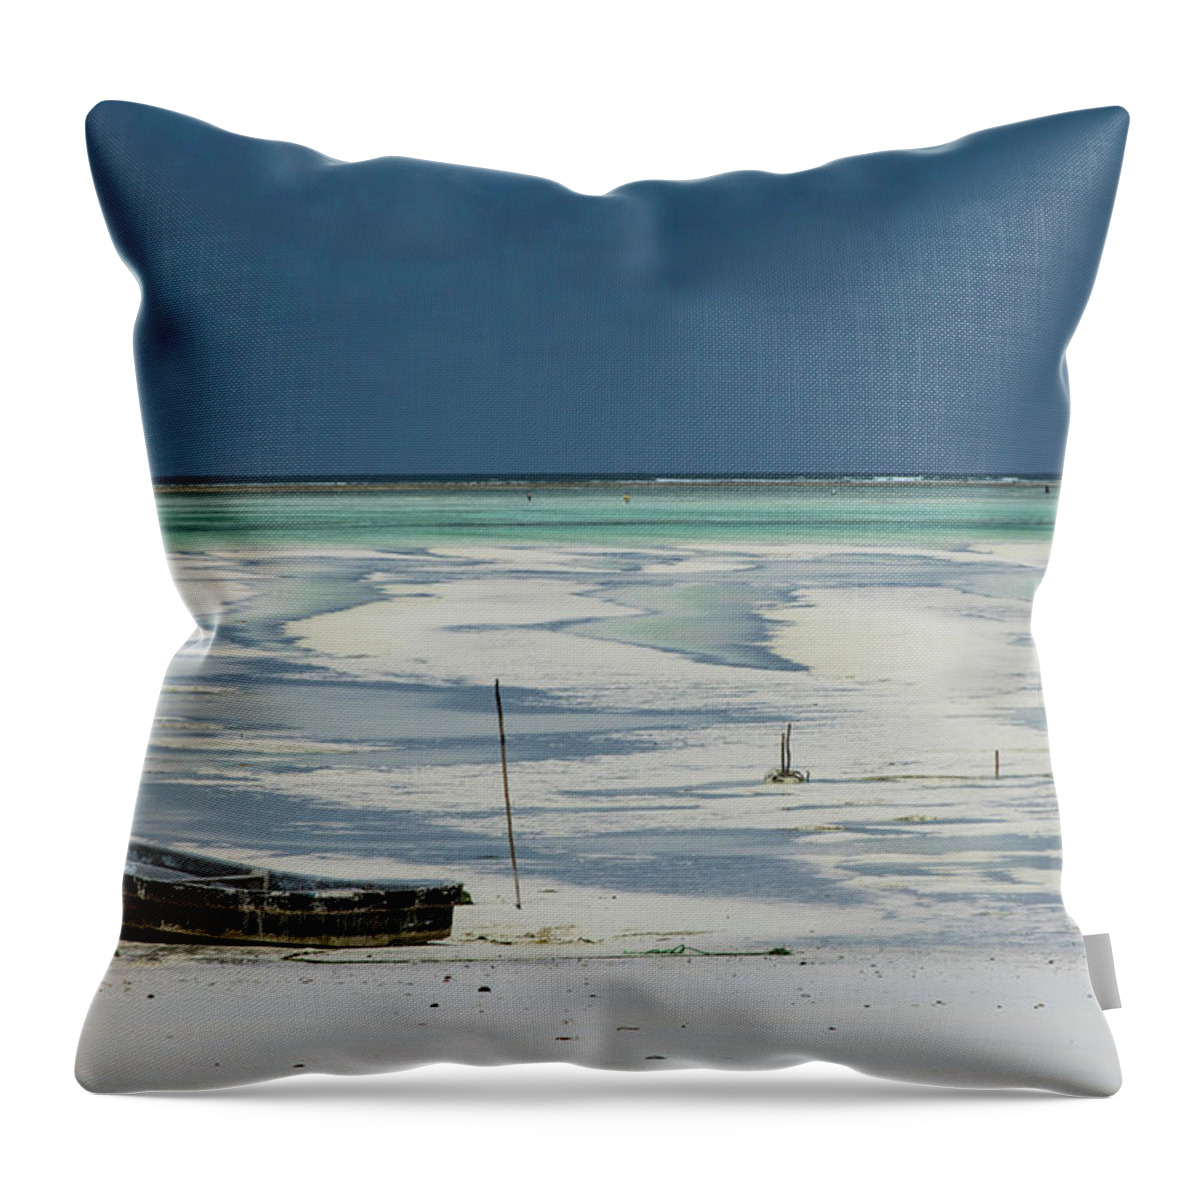  Throw Pillow featuring the photograph Abandoned by Mache Del Campo